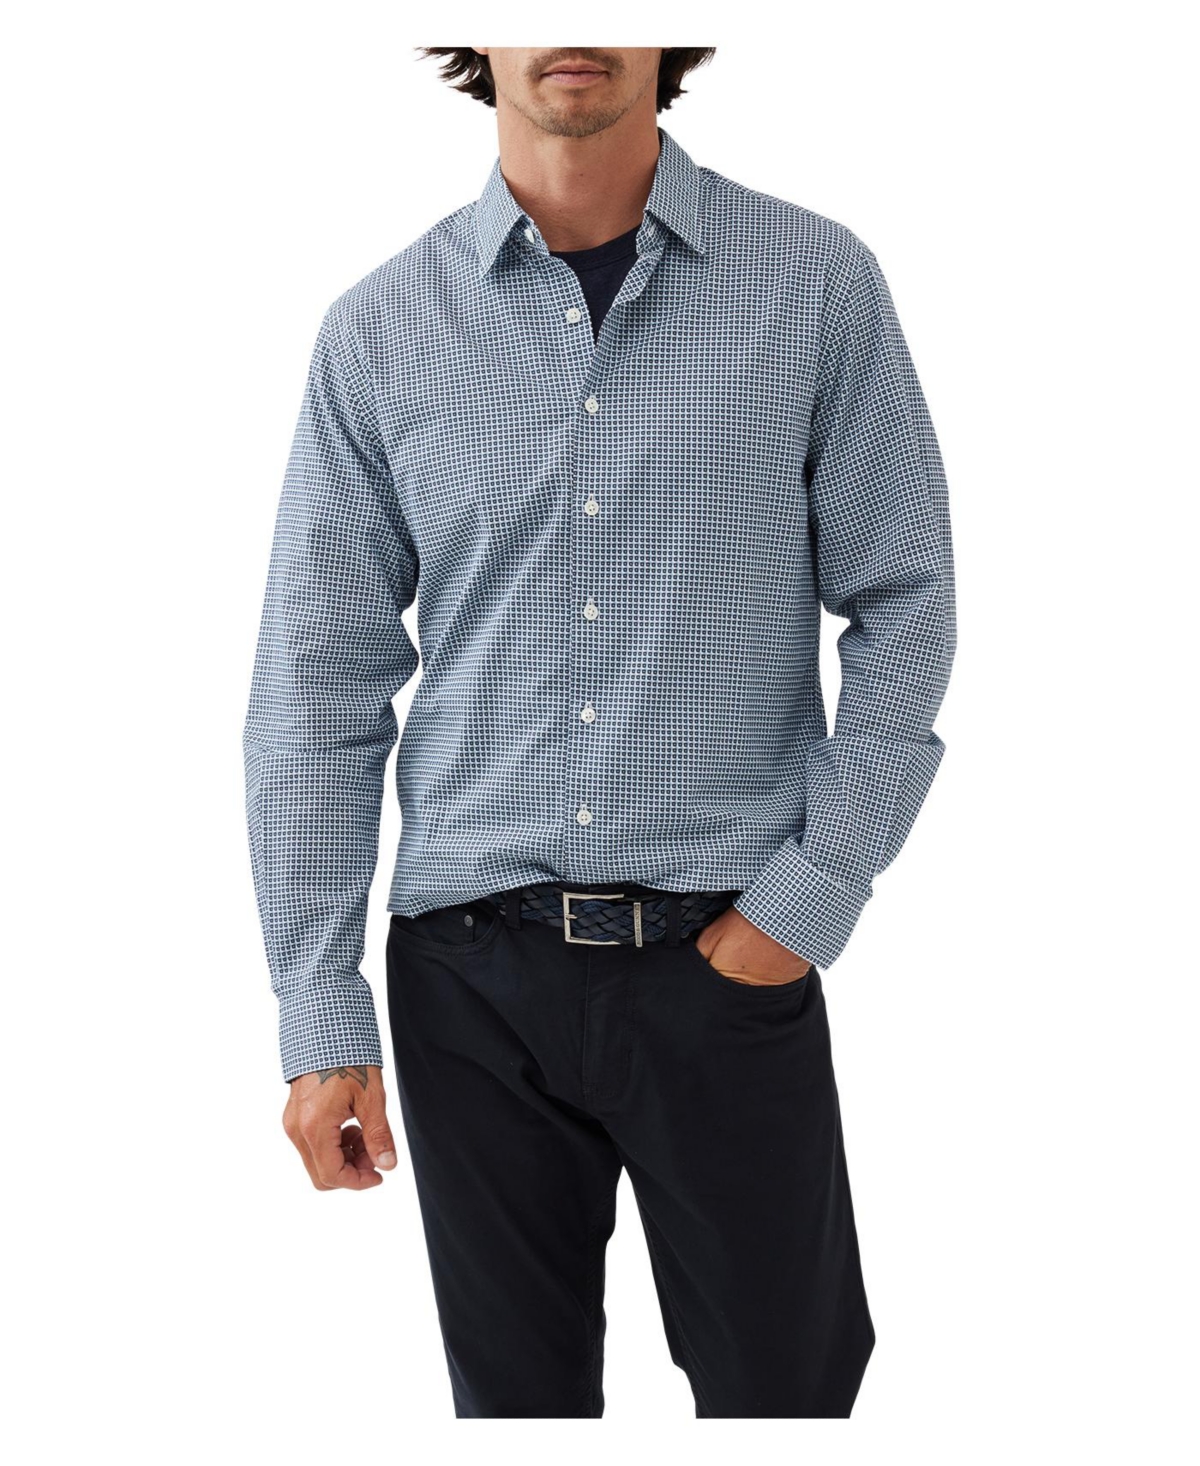 Tinline River Sports Fit Shirt - Chambray blue